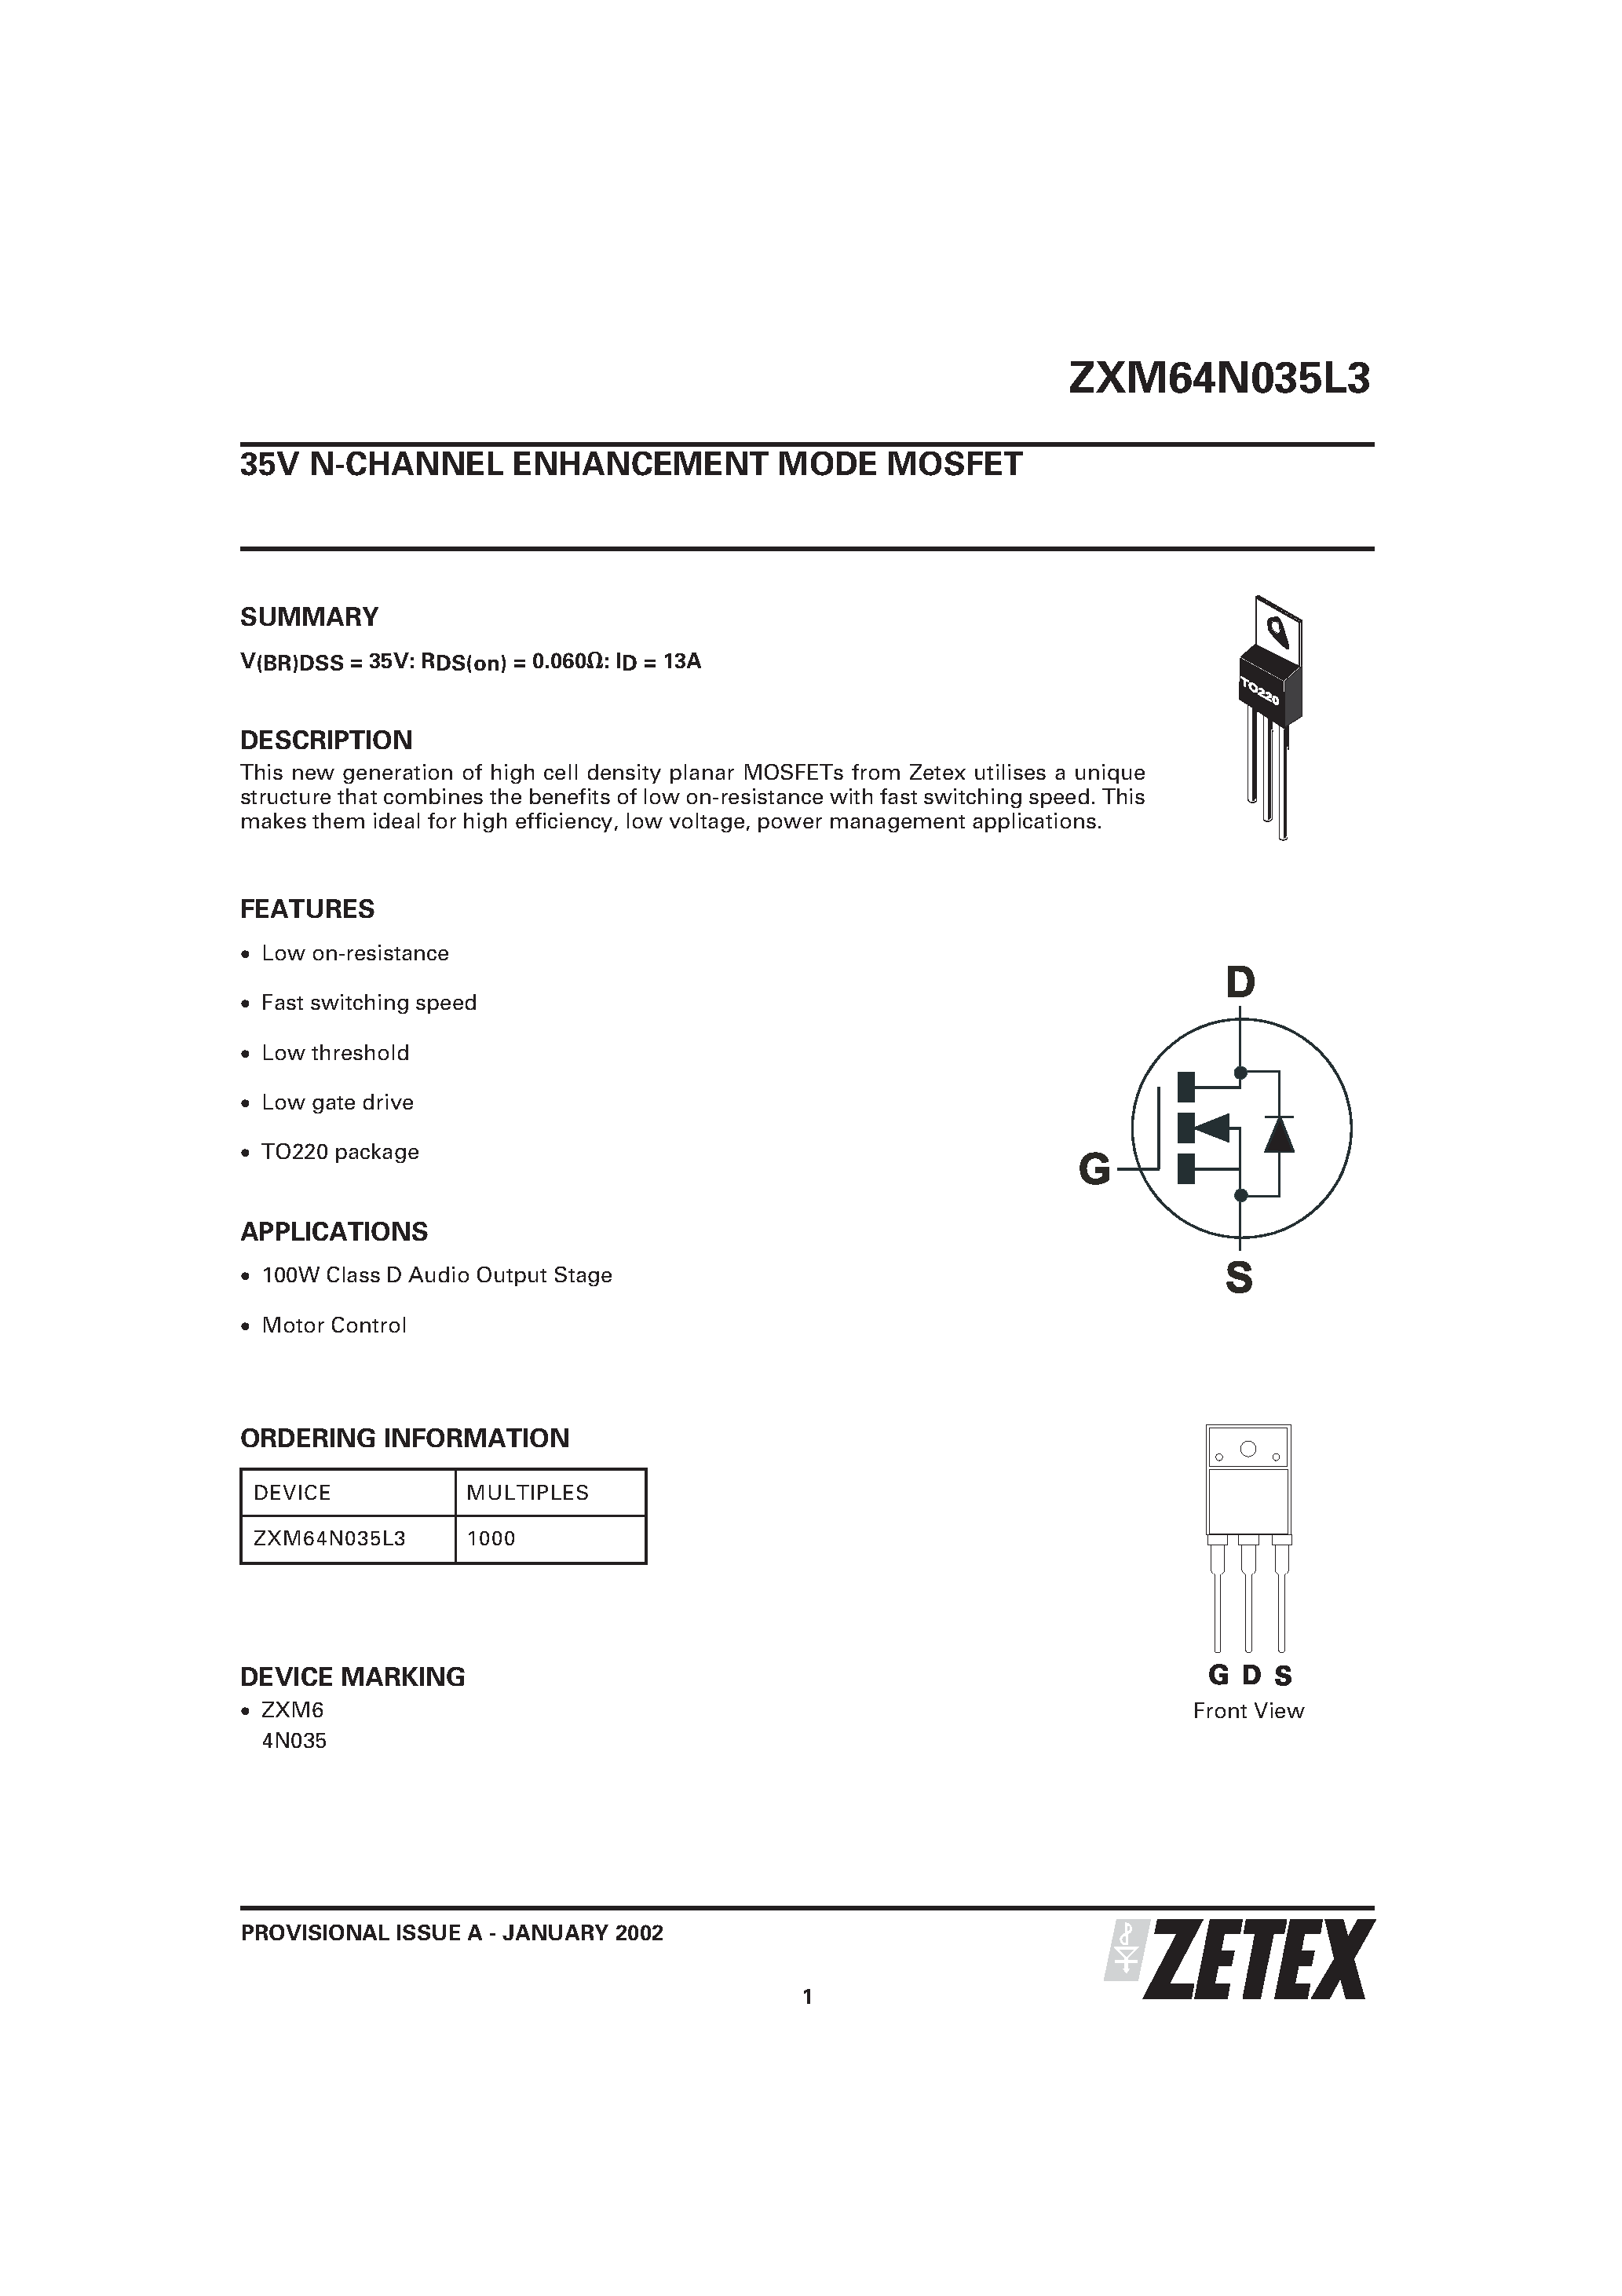 Datasheet ZXM64N035L3 - 35V N-CHANNEL ENHANCEMENT MODE MOSFET page 1